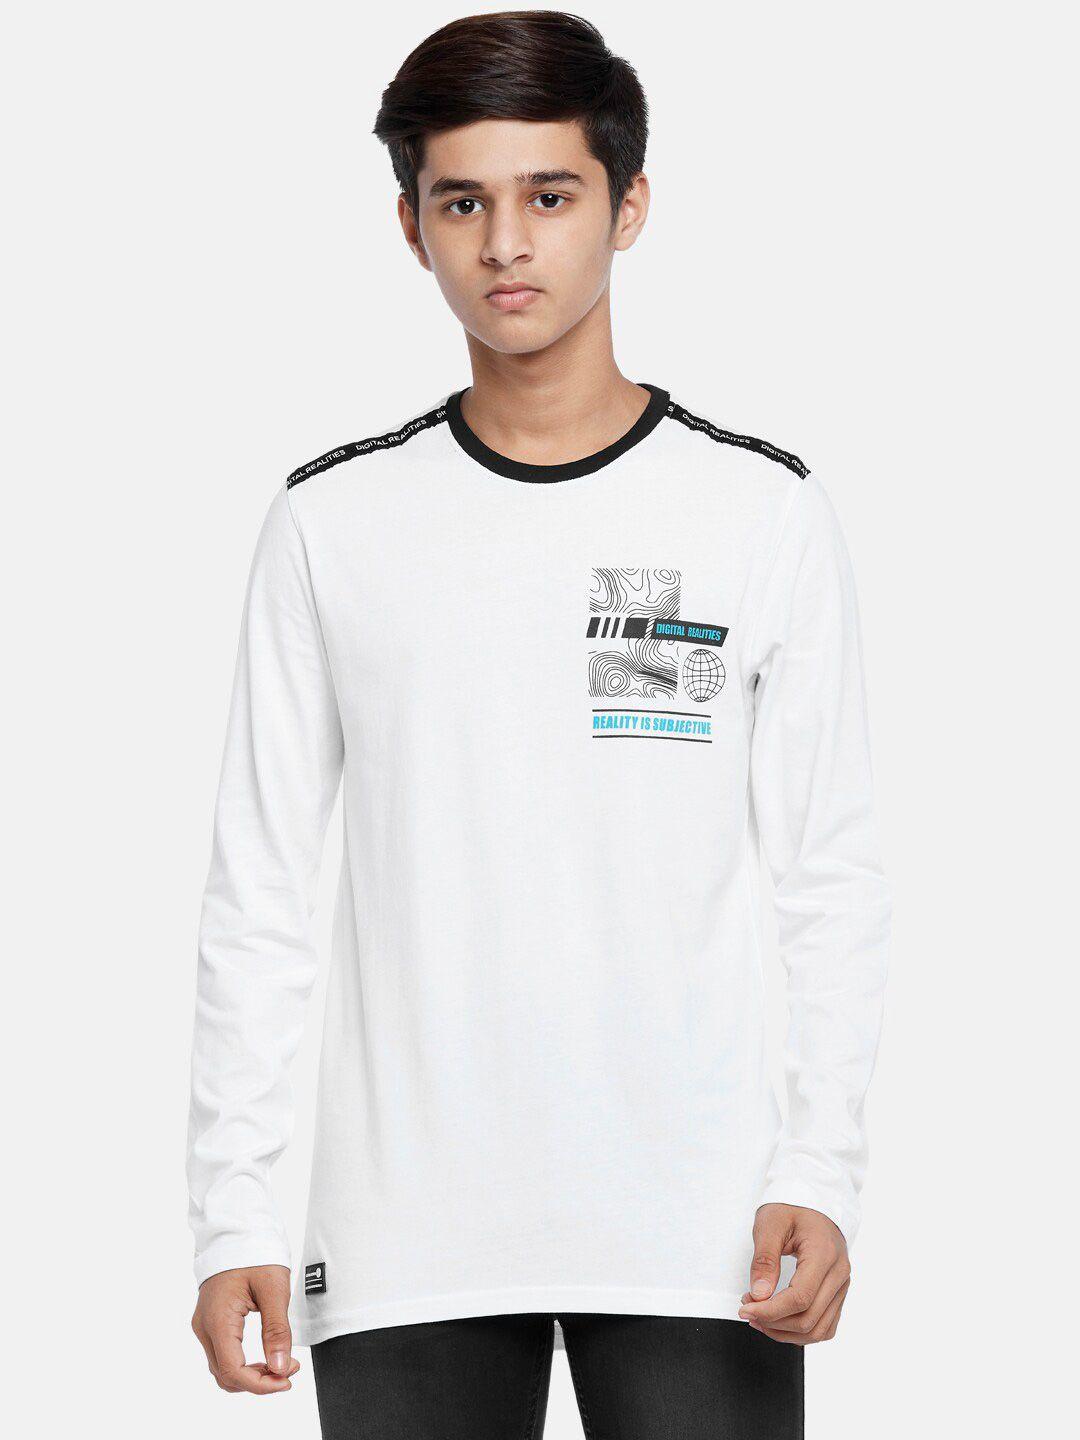 coolsters by pantaloons boys white printed t-shirt